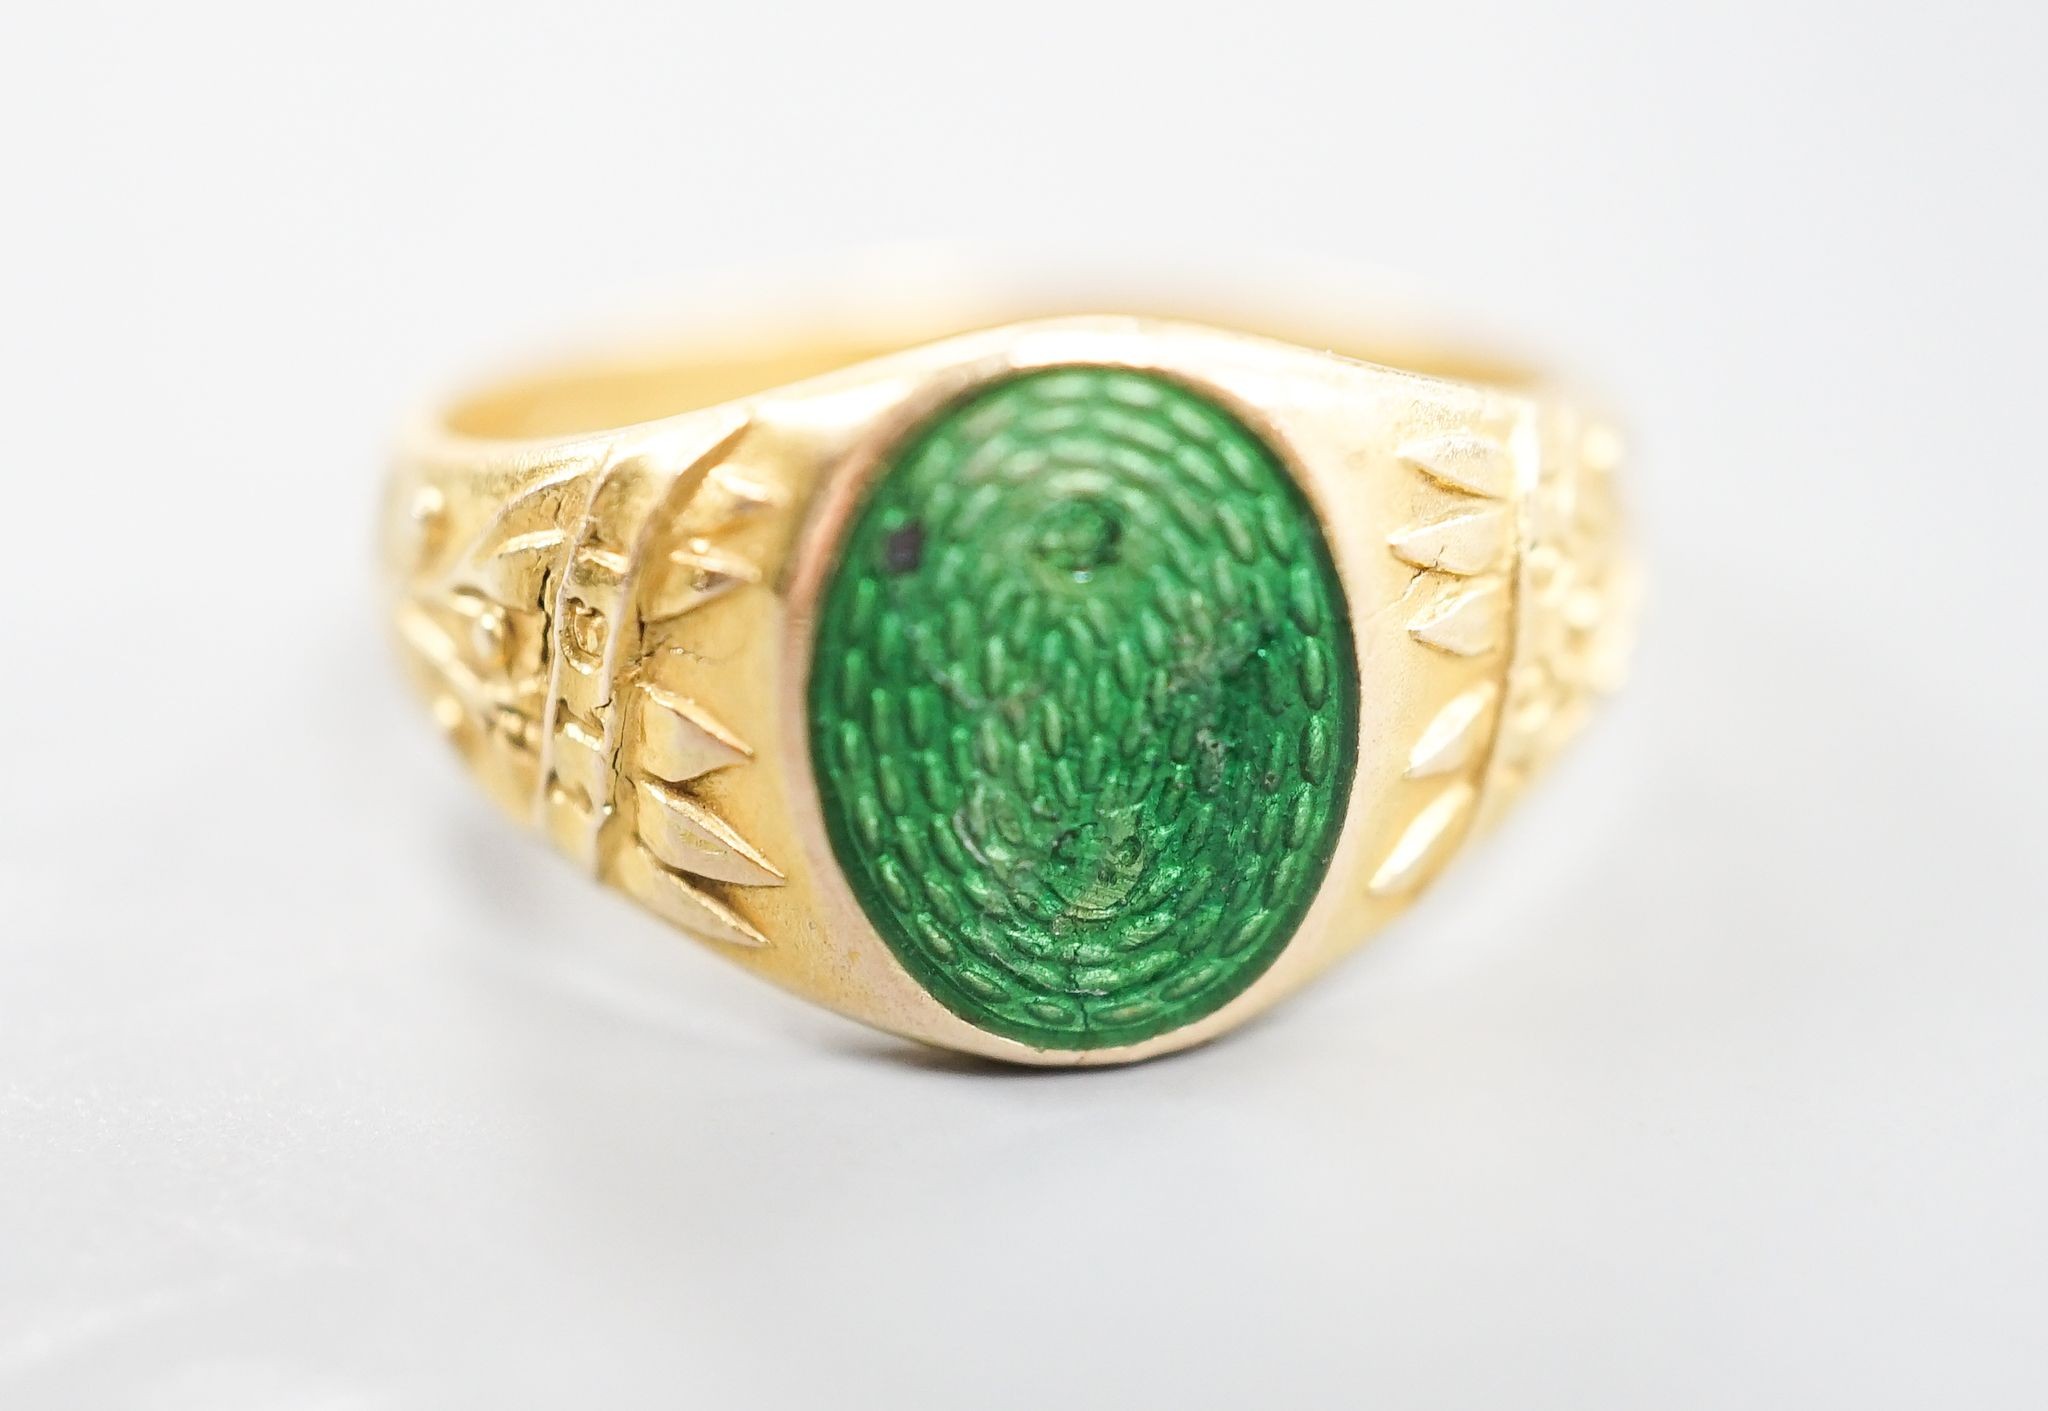 An early 20th century Austro-Hungarian (Vienna) 580/1000 yellow metal and green enamel signet ring, depicting the bust of a gentleman to sinister, size Q/R, gross 6.7 grams.